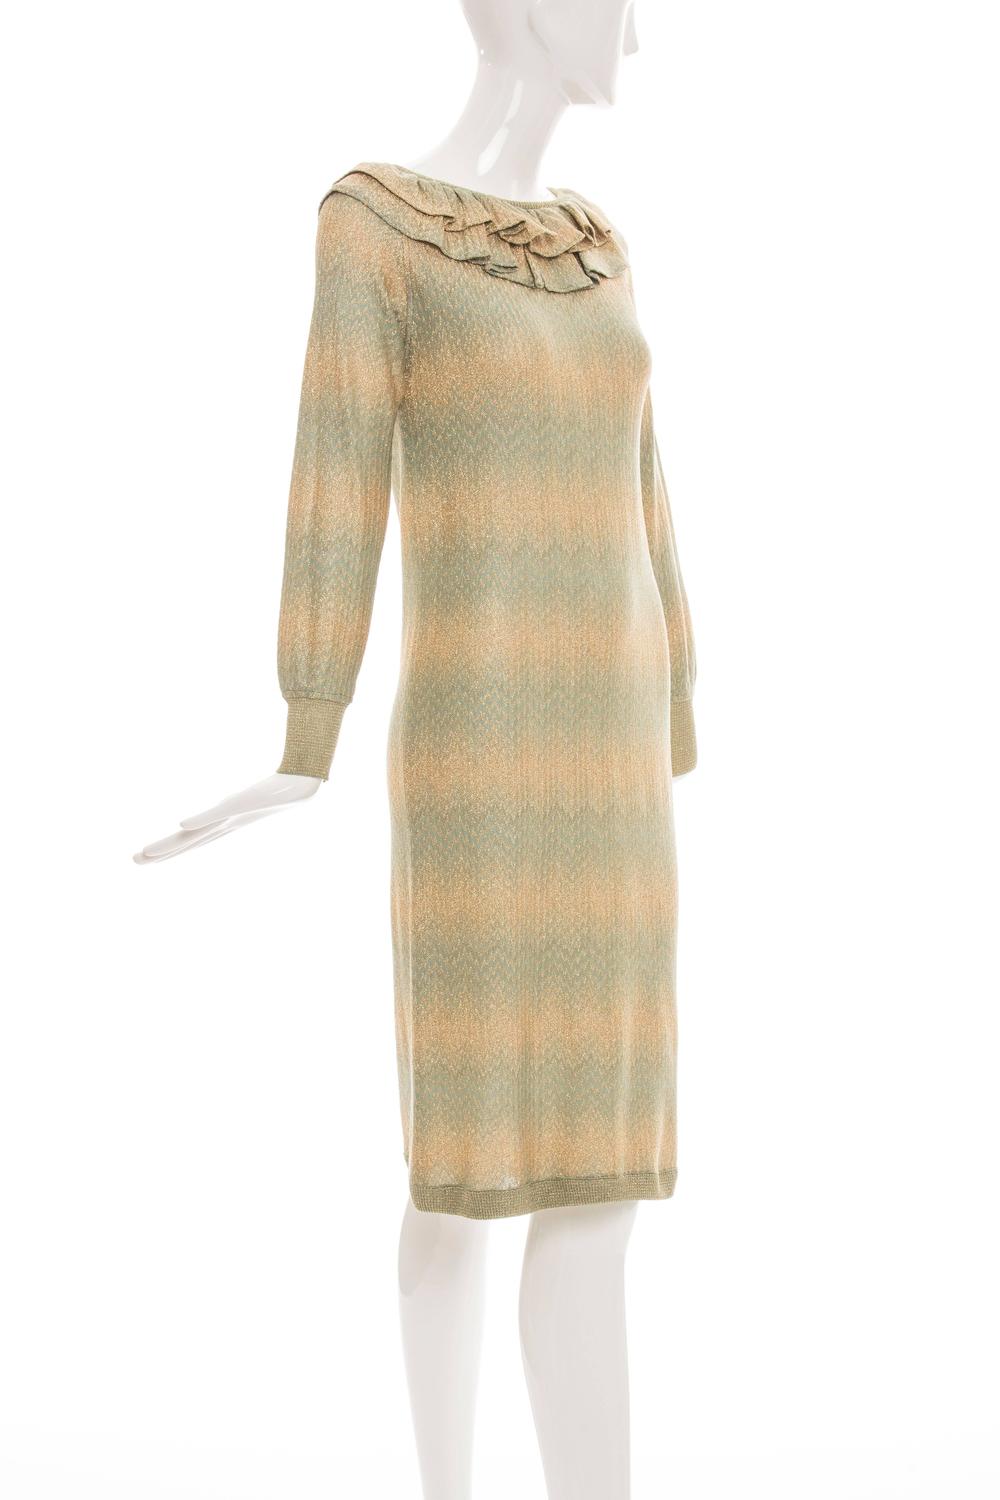 Missoni Gold Label Circa 1980's For Sale at 1stdibs